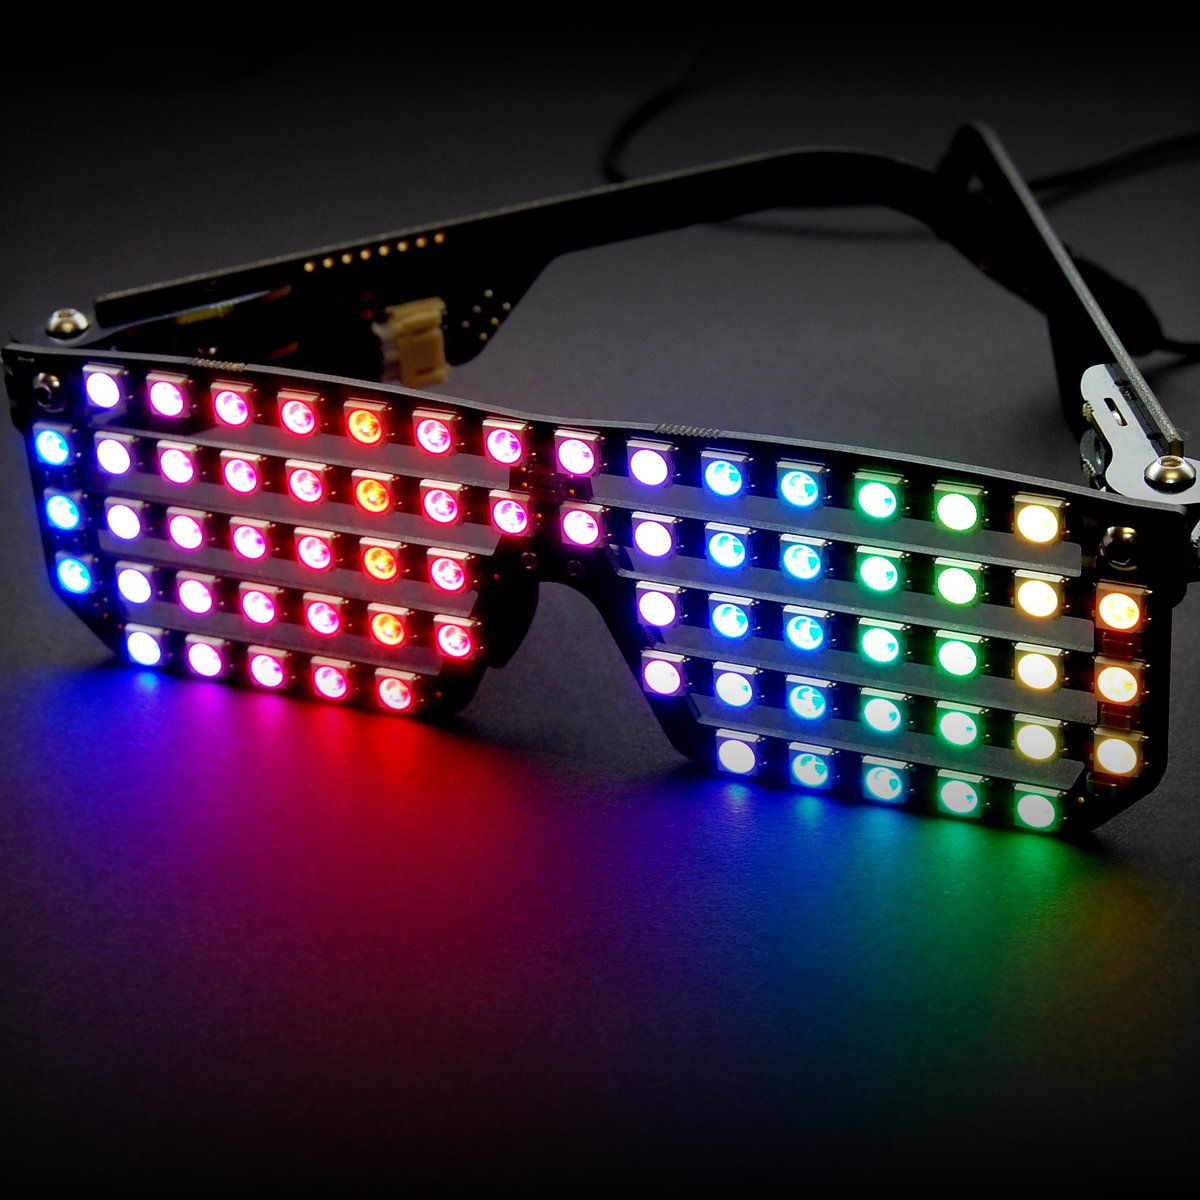 RGB LED Shades Kit - Wearable macetech on Tindie